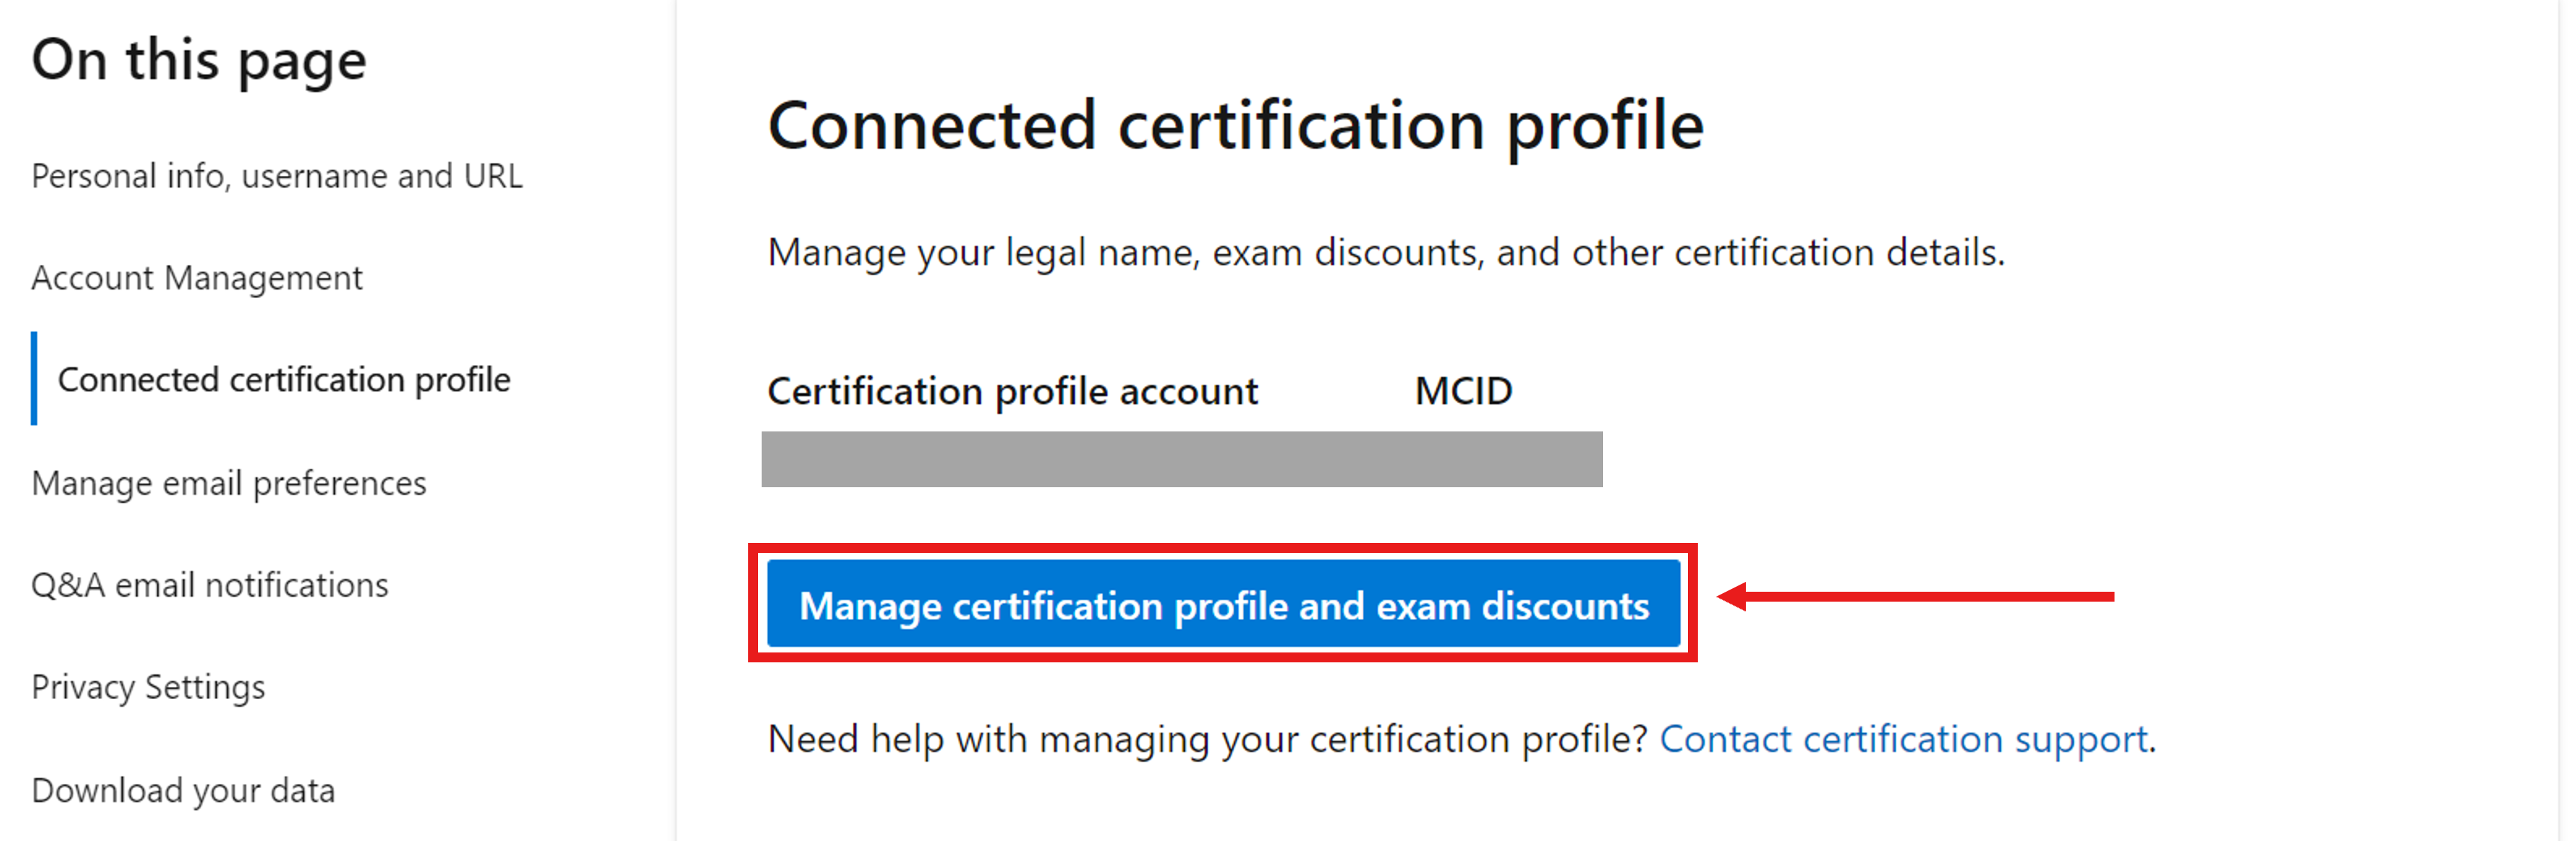 Screenshot of the Connected certification profile section in the Microsoft Learn profile settings.